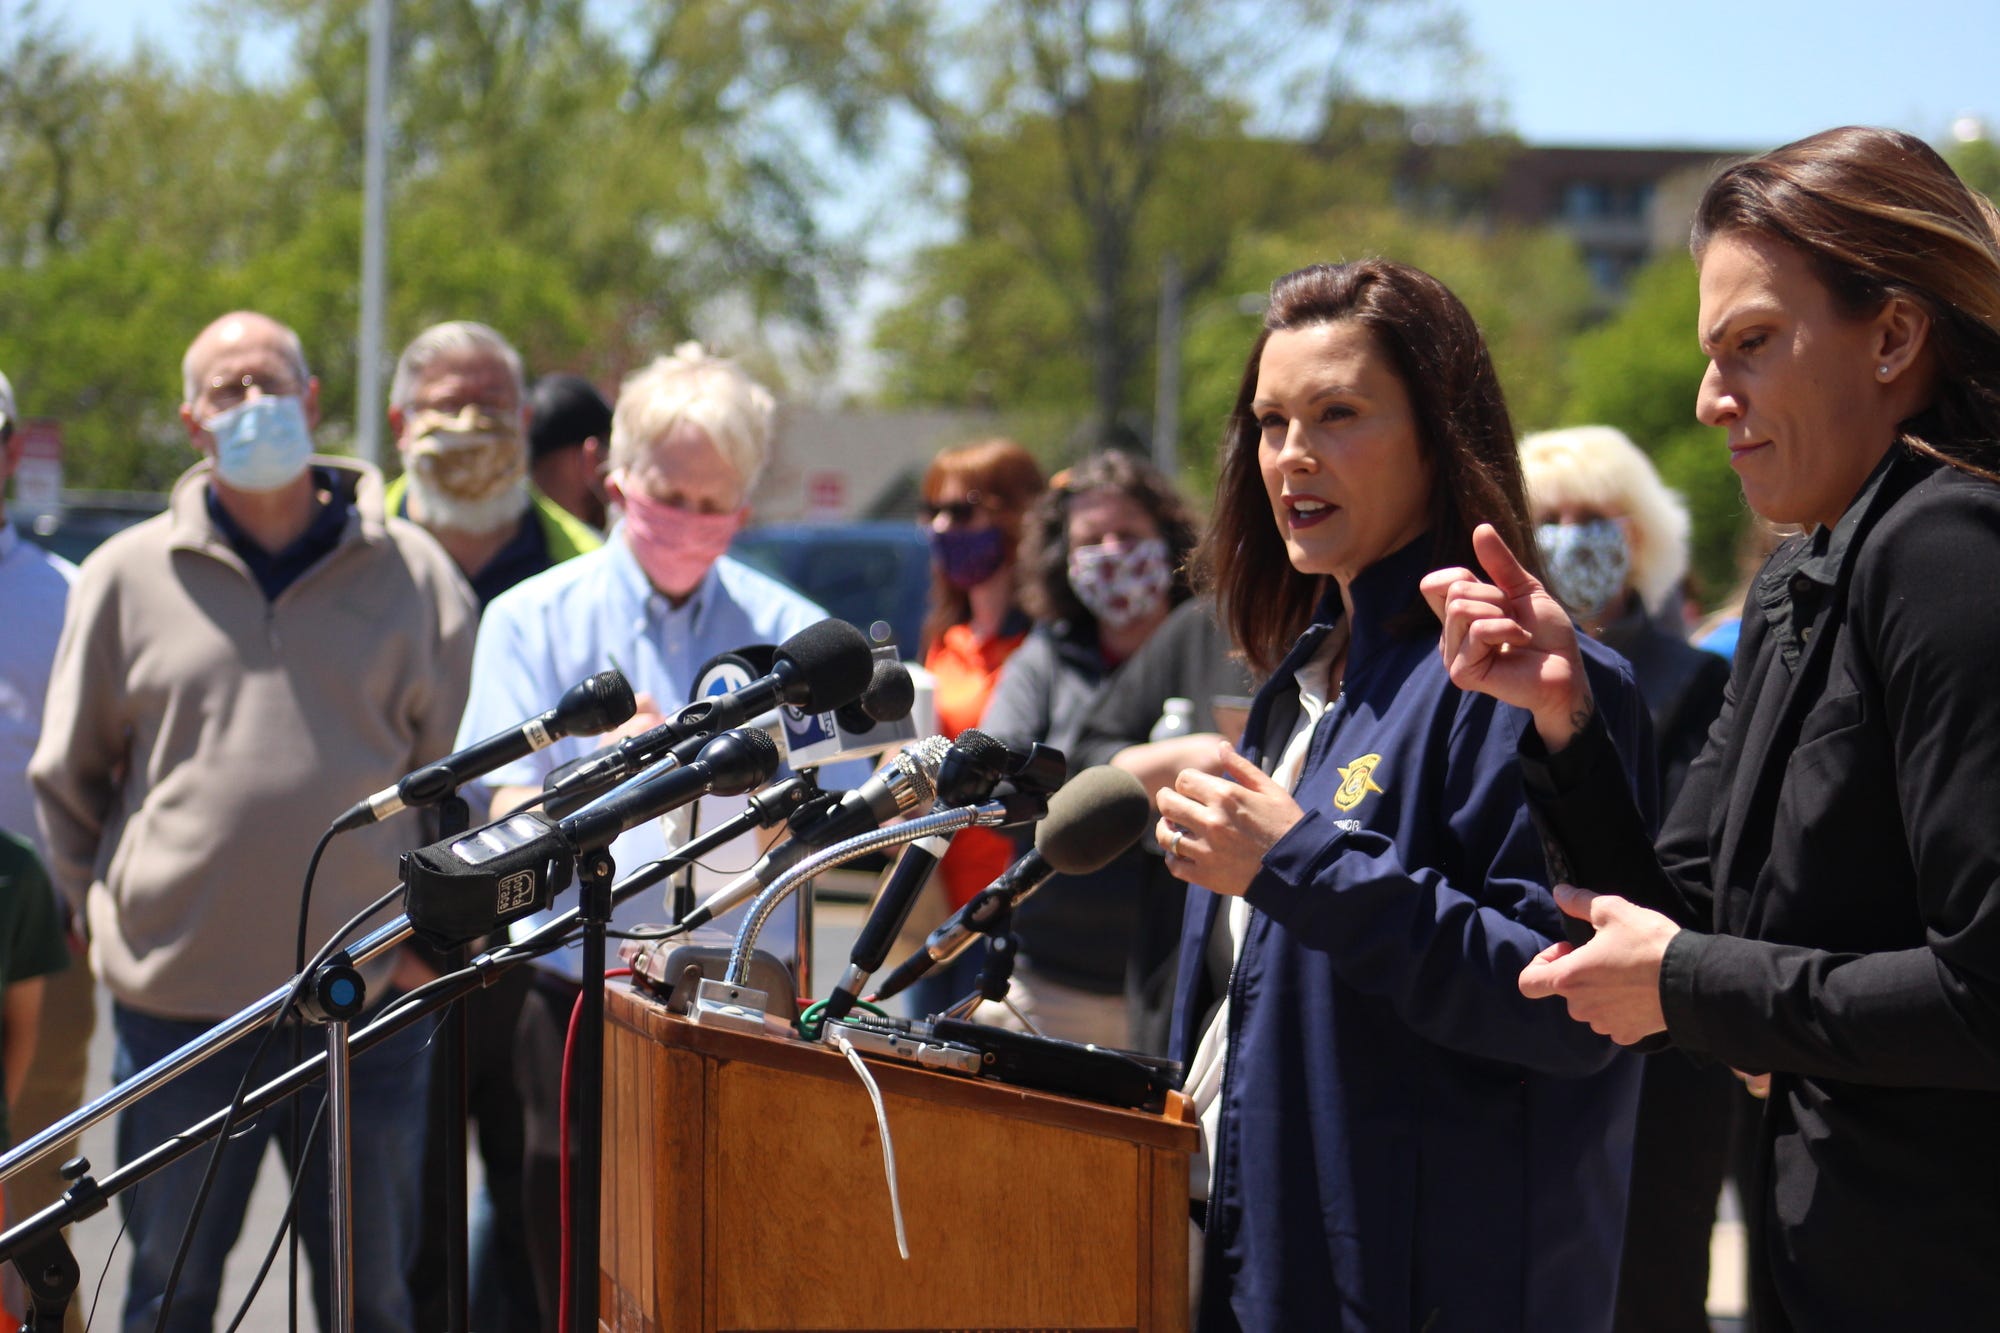 Gov. Gretchen Whitmer speaks at a press conference in Midland on May 20, 2020. She declared a state of emergency for Midland County after the Edenville and Sanford dams breached.